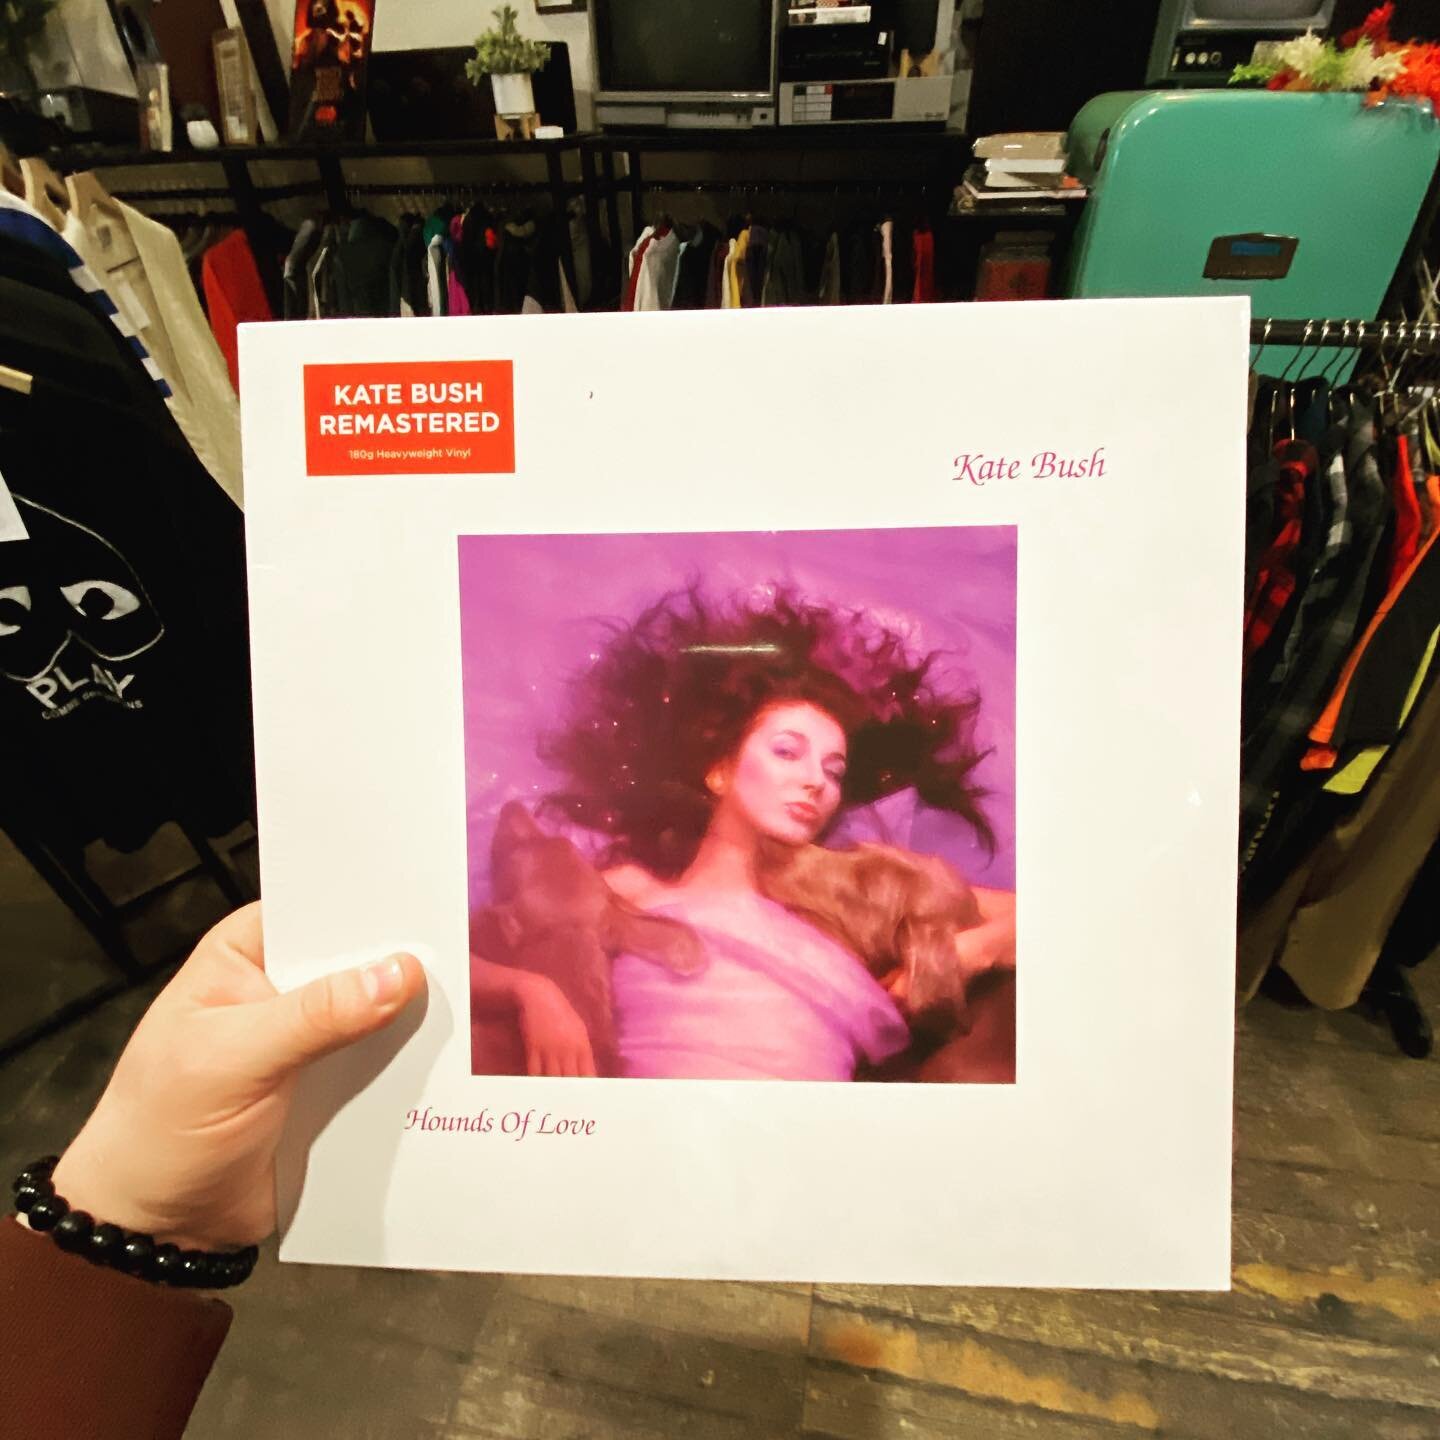 Hefty restock this weekend! Fresh wax from Kate Bush, MF Doom, Max Miller, Prince, and more! Plus a super tasty mix of Japanese City Pop 😎😎😎 

Limited hours this weekend for Mid West Music Fest, so go grab your records then come down south!

#newa